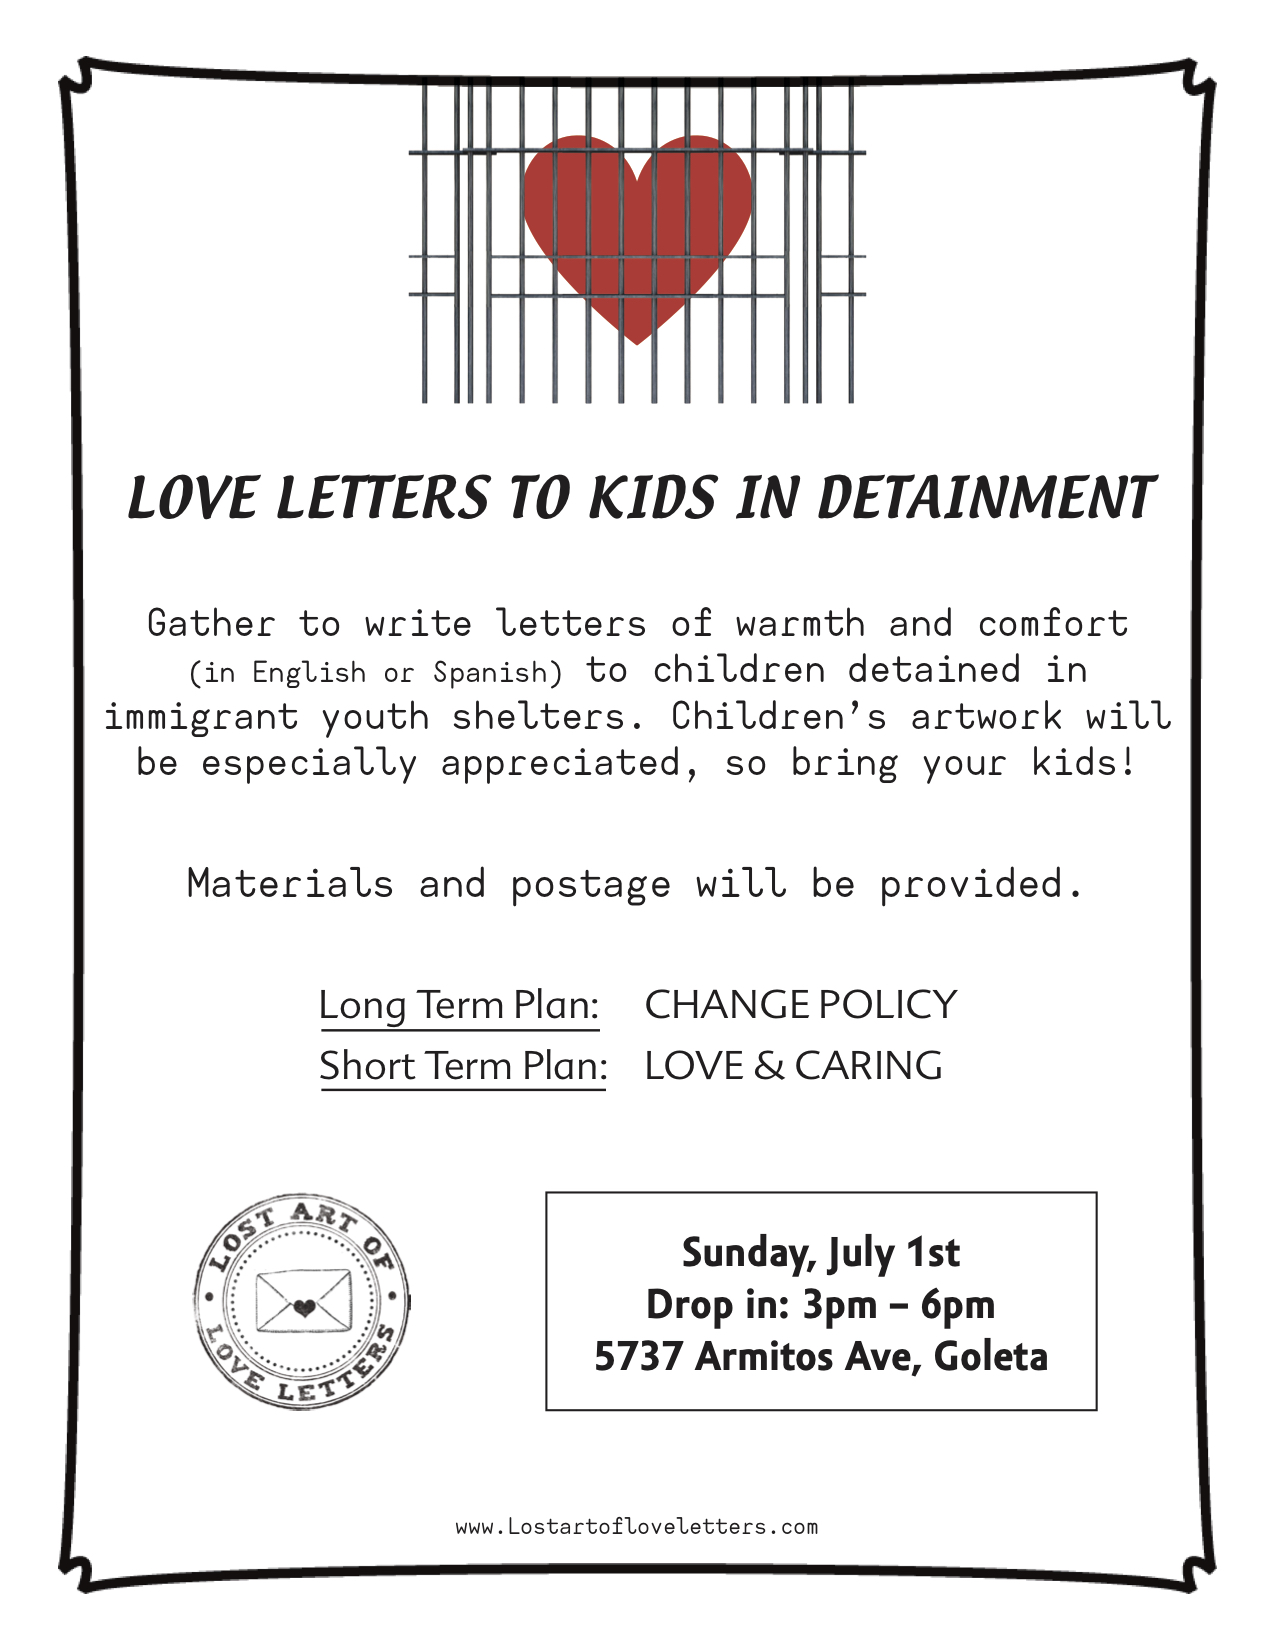 Love Letters to Kids in Detainment — Lost Art of Love Letters